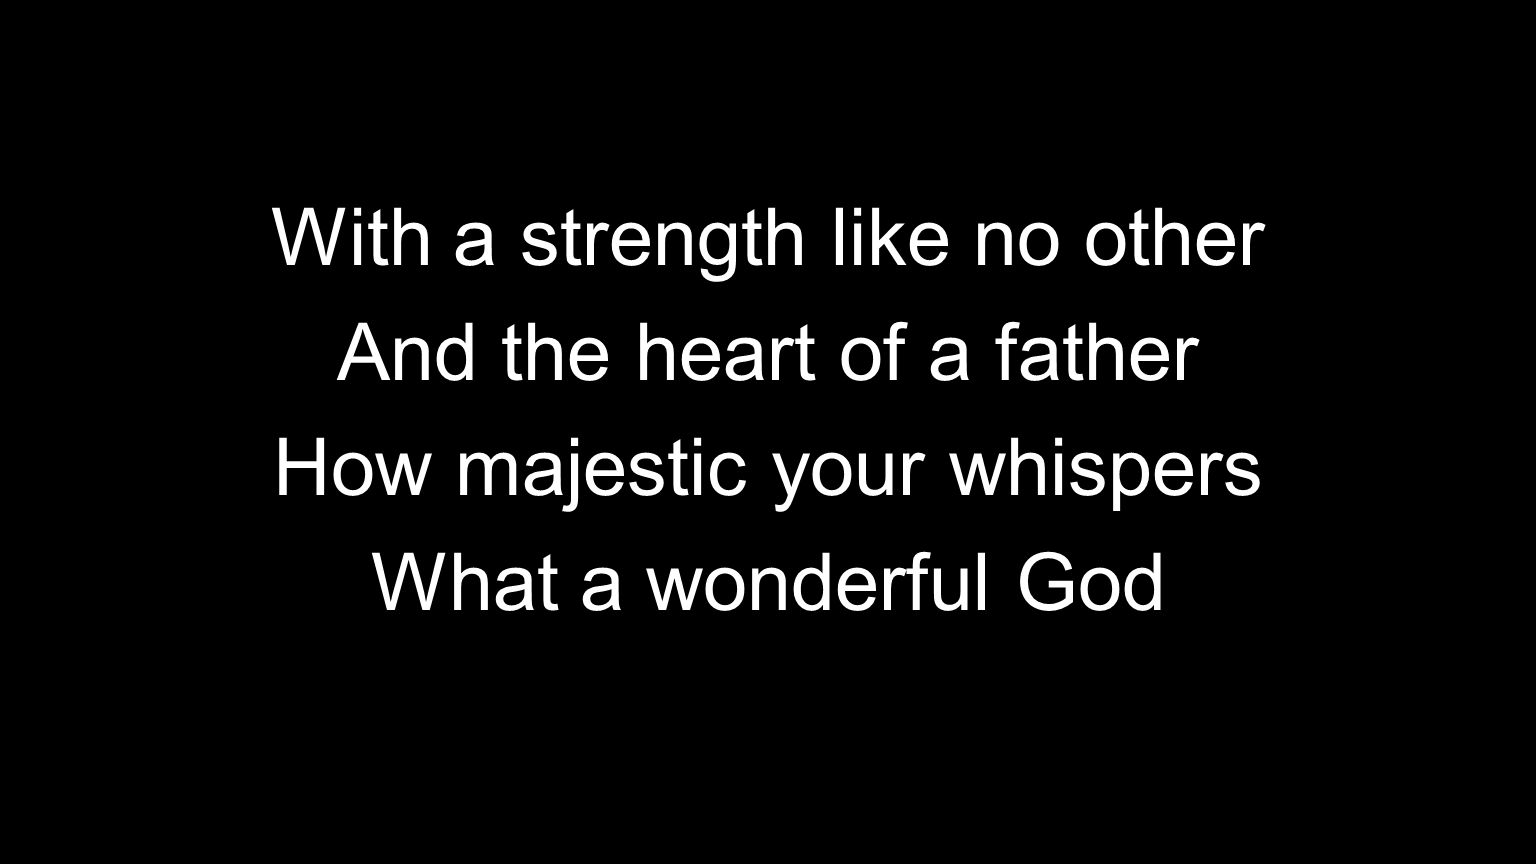 With a strength like no other And the heart of a father How majestic your whispers What a wonderful God